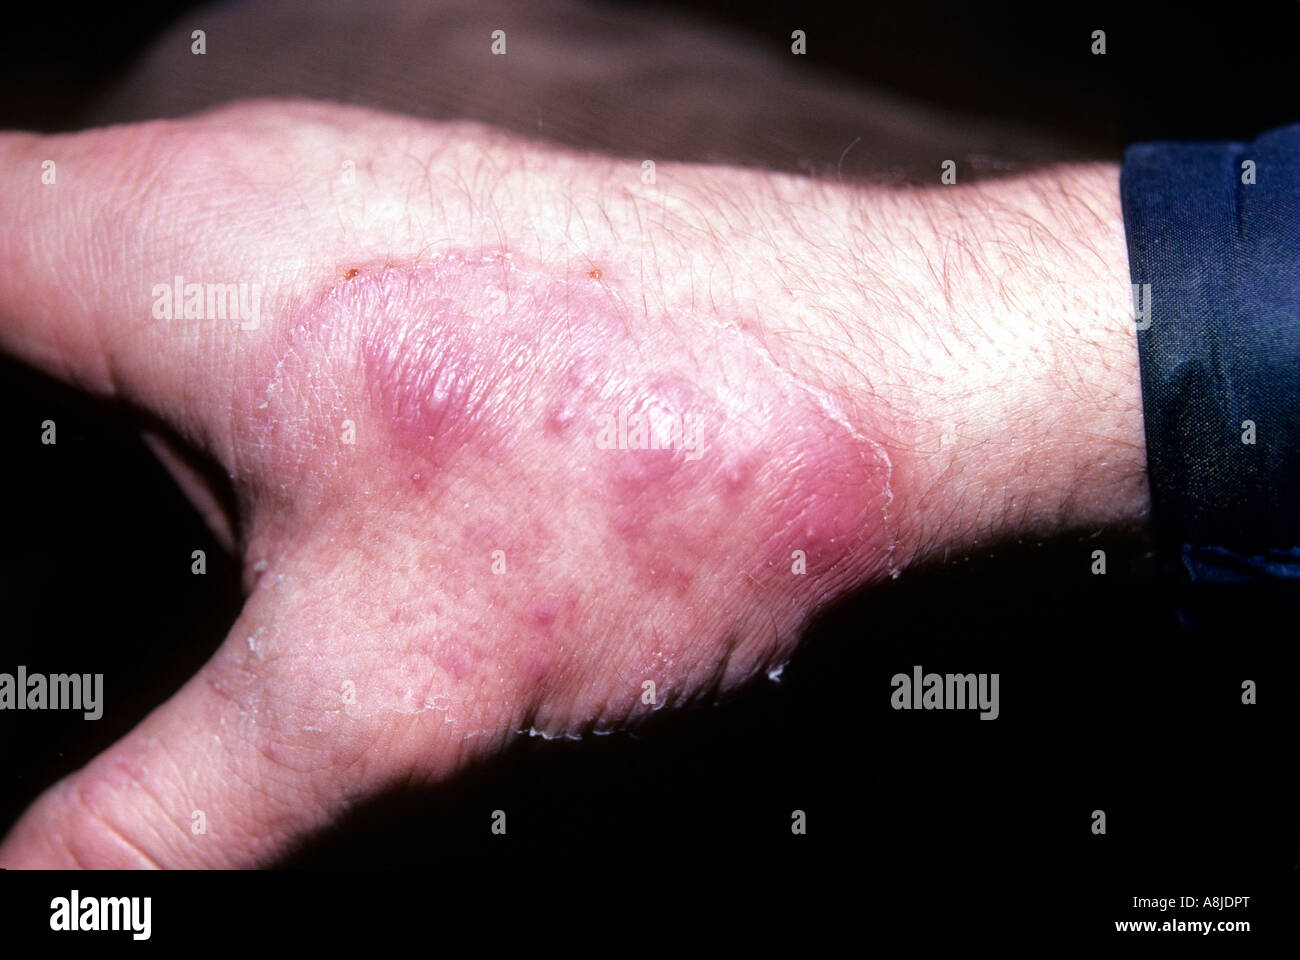 Fungal infection rash (tinea) on patient's hand. Stock Photo